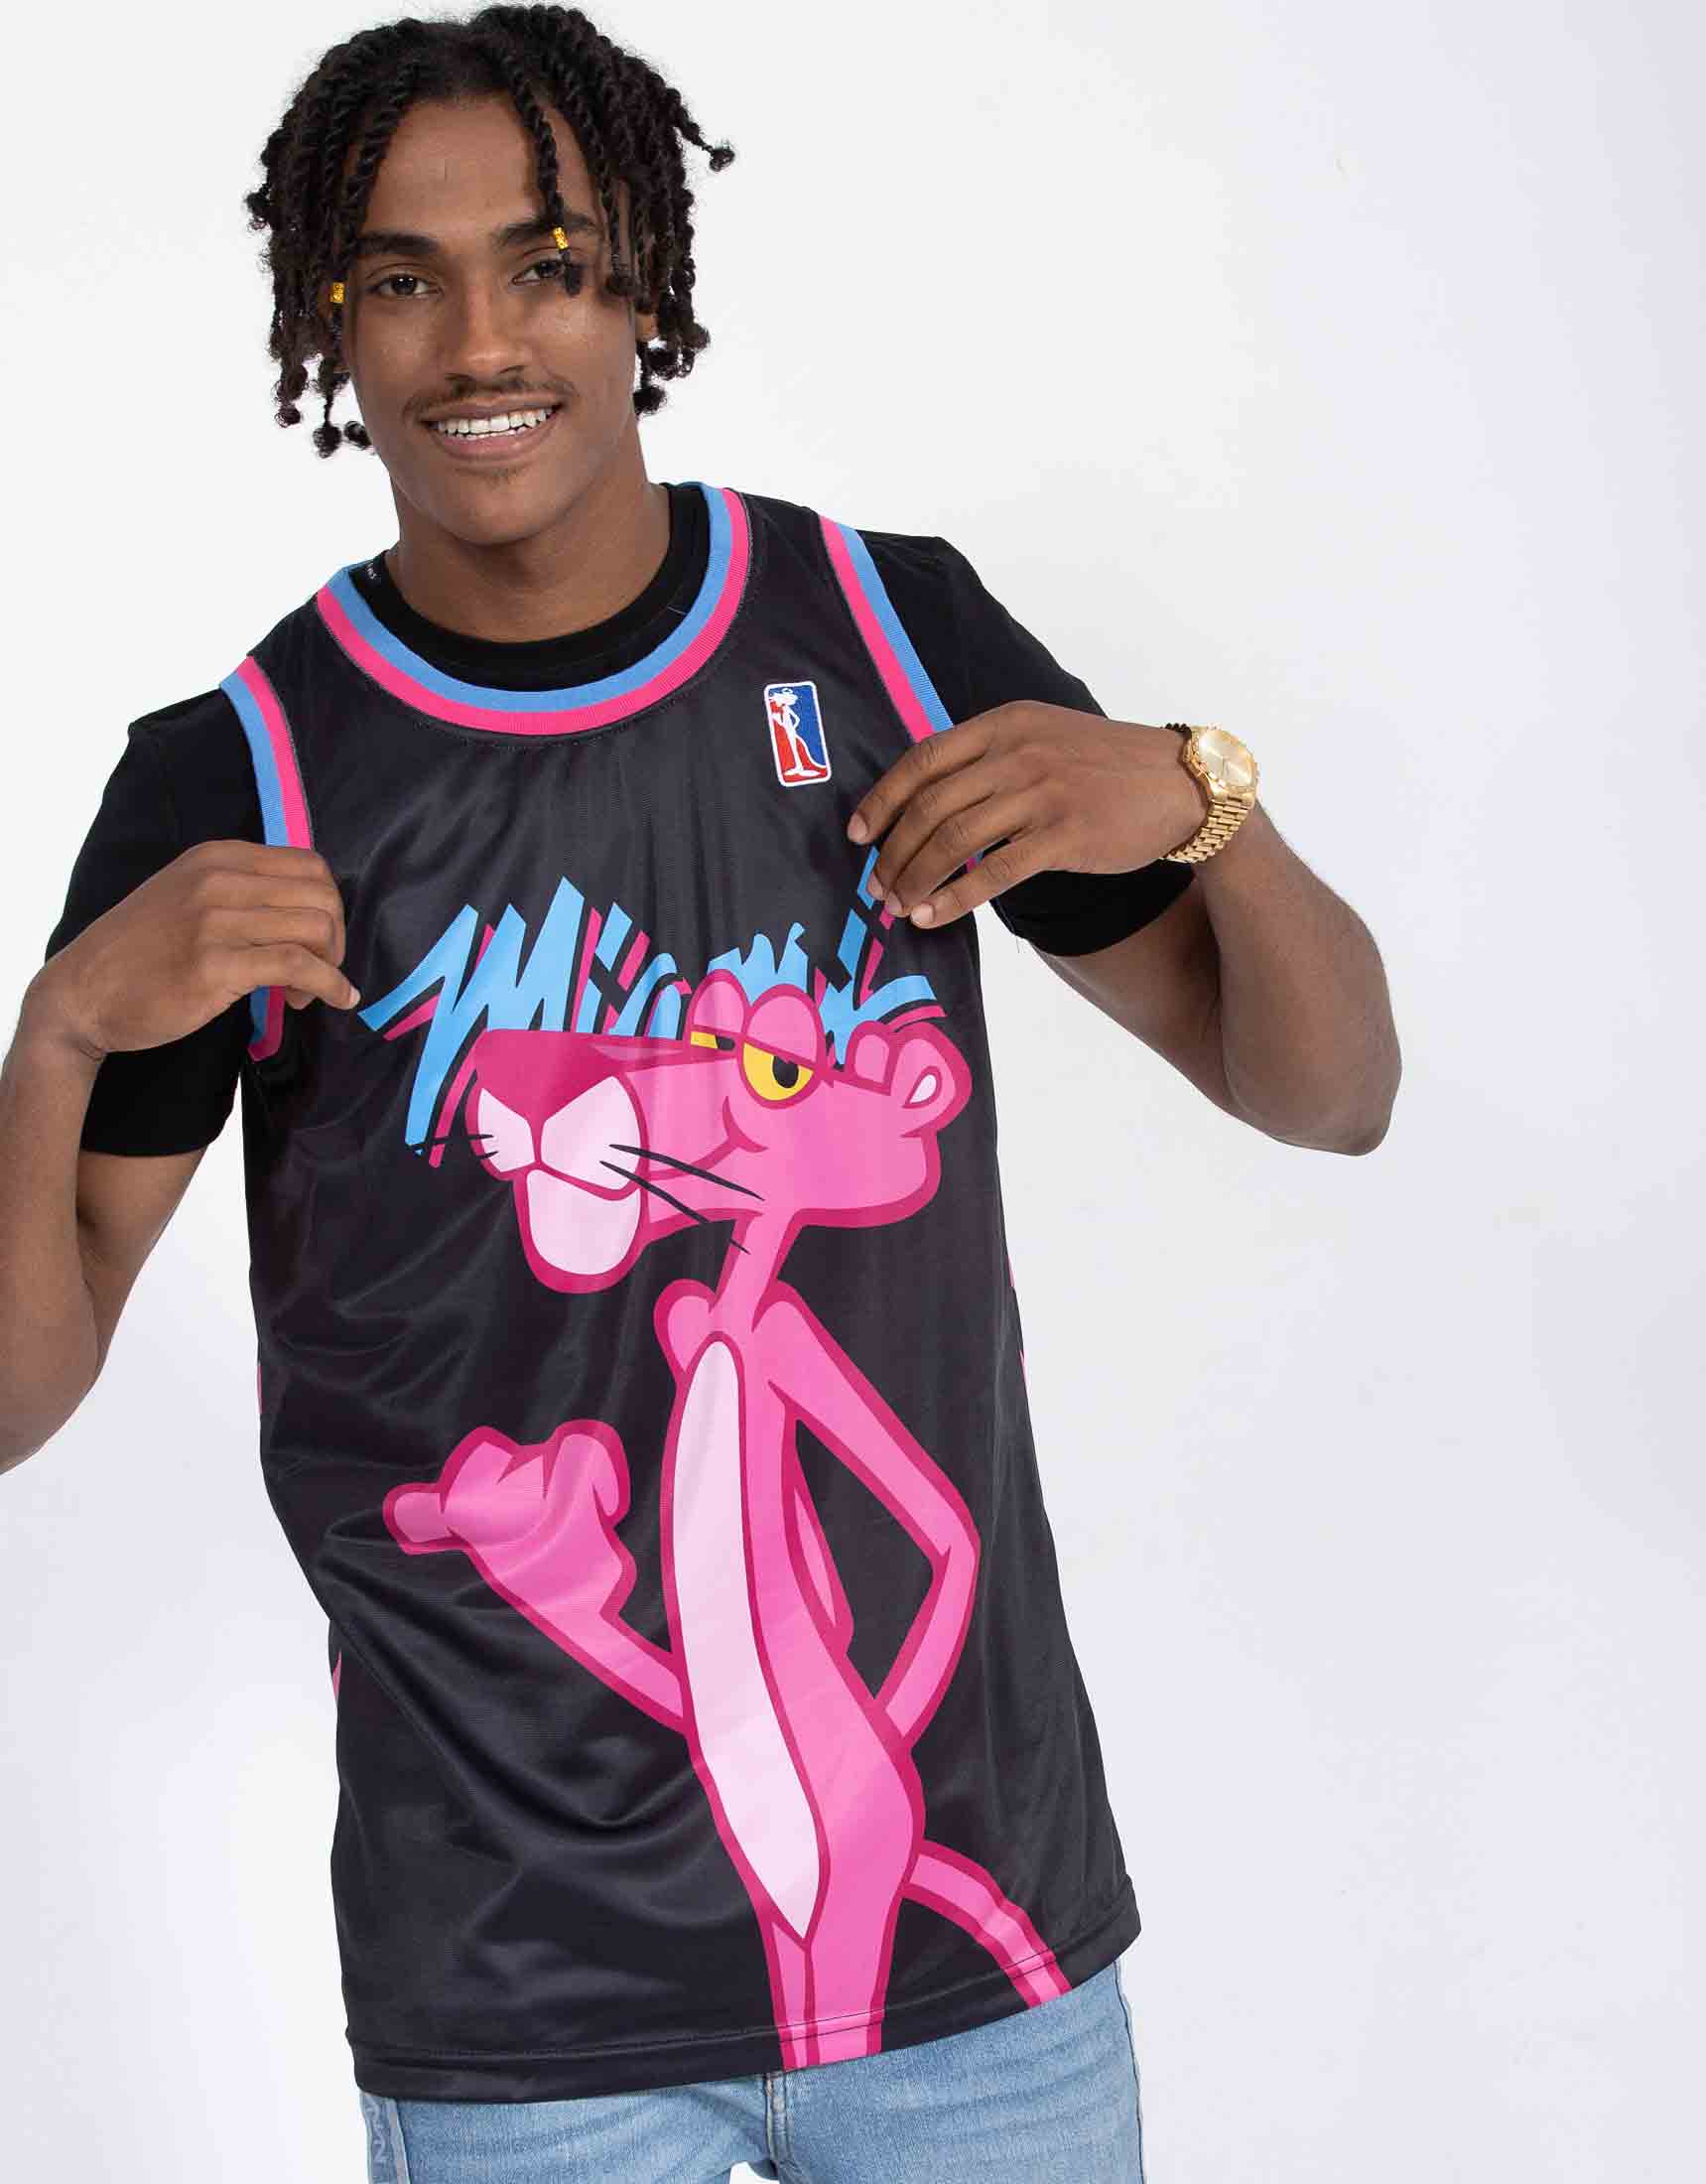 Miami X Pink Panther #3 Basketball Jersey – 99Jersey®: Your